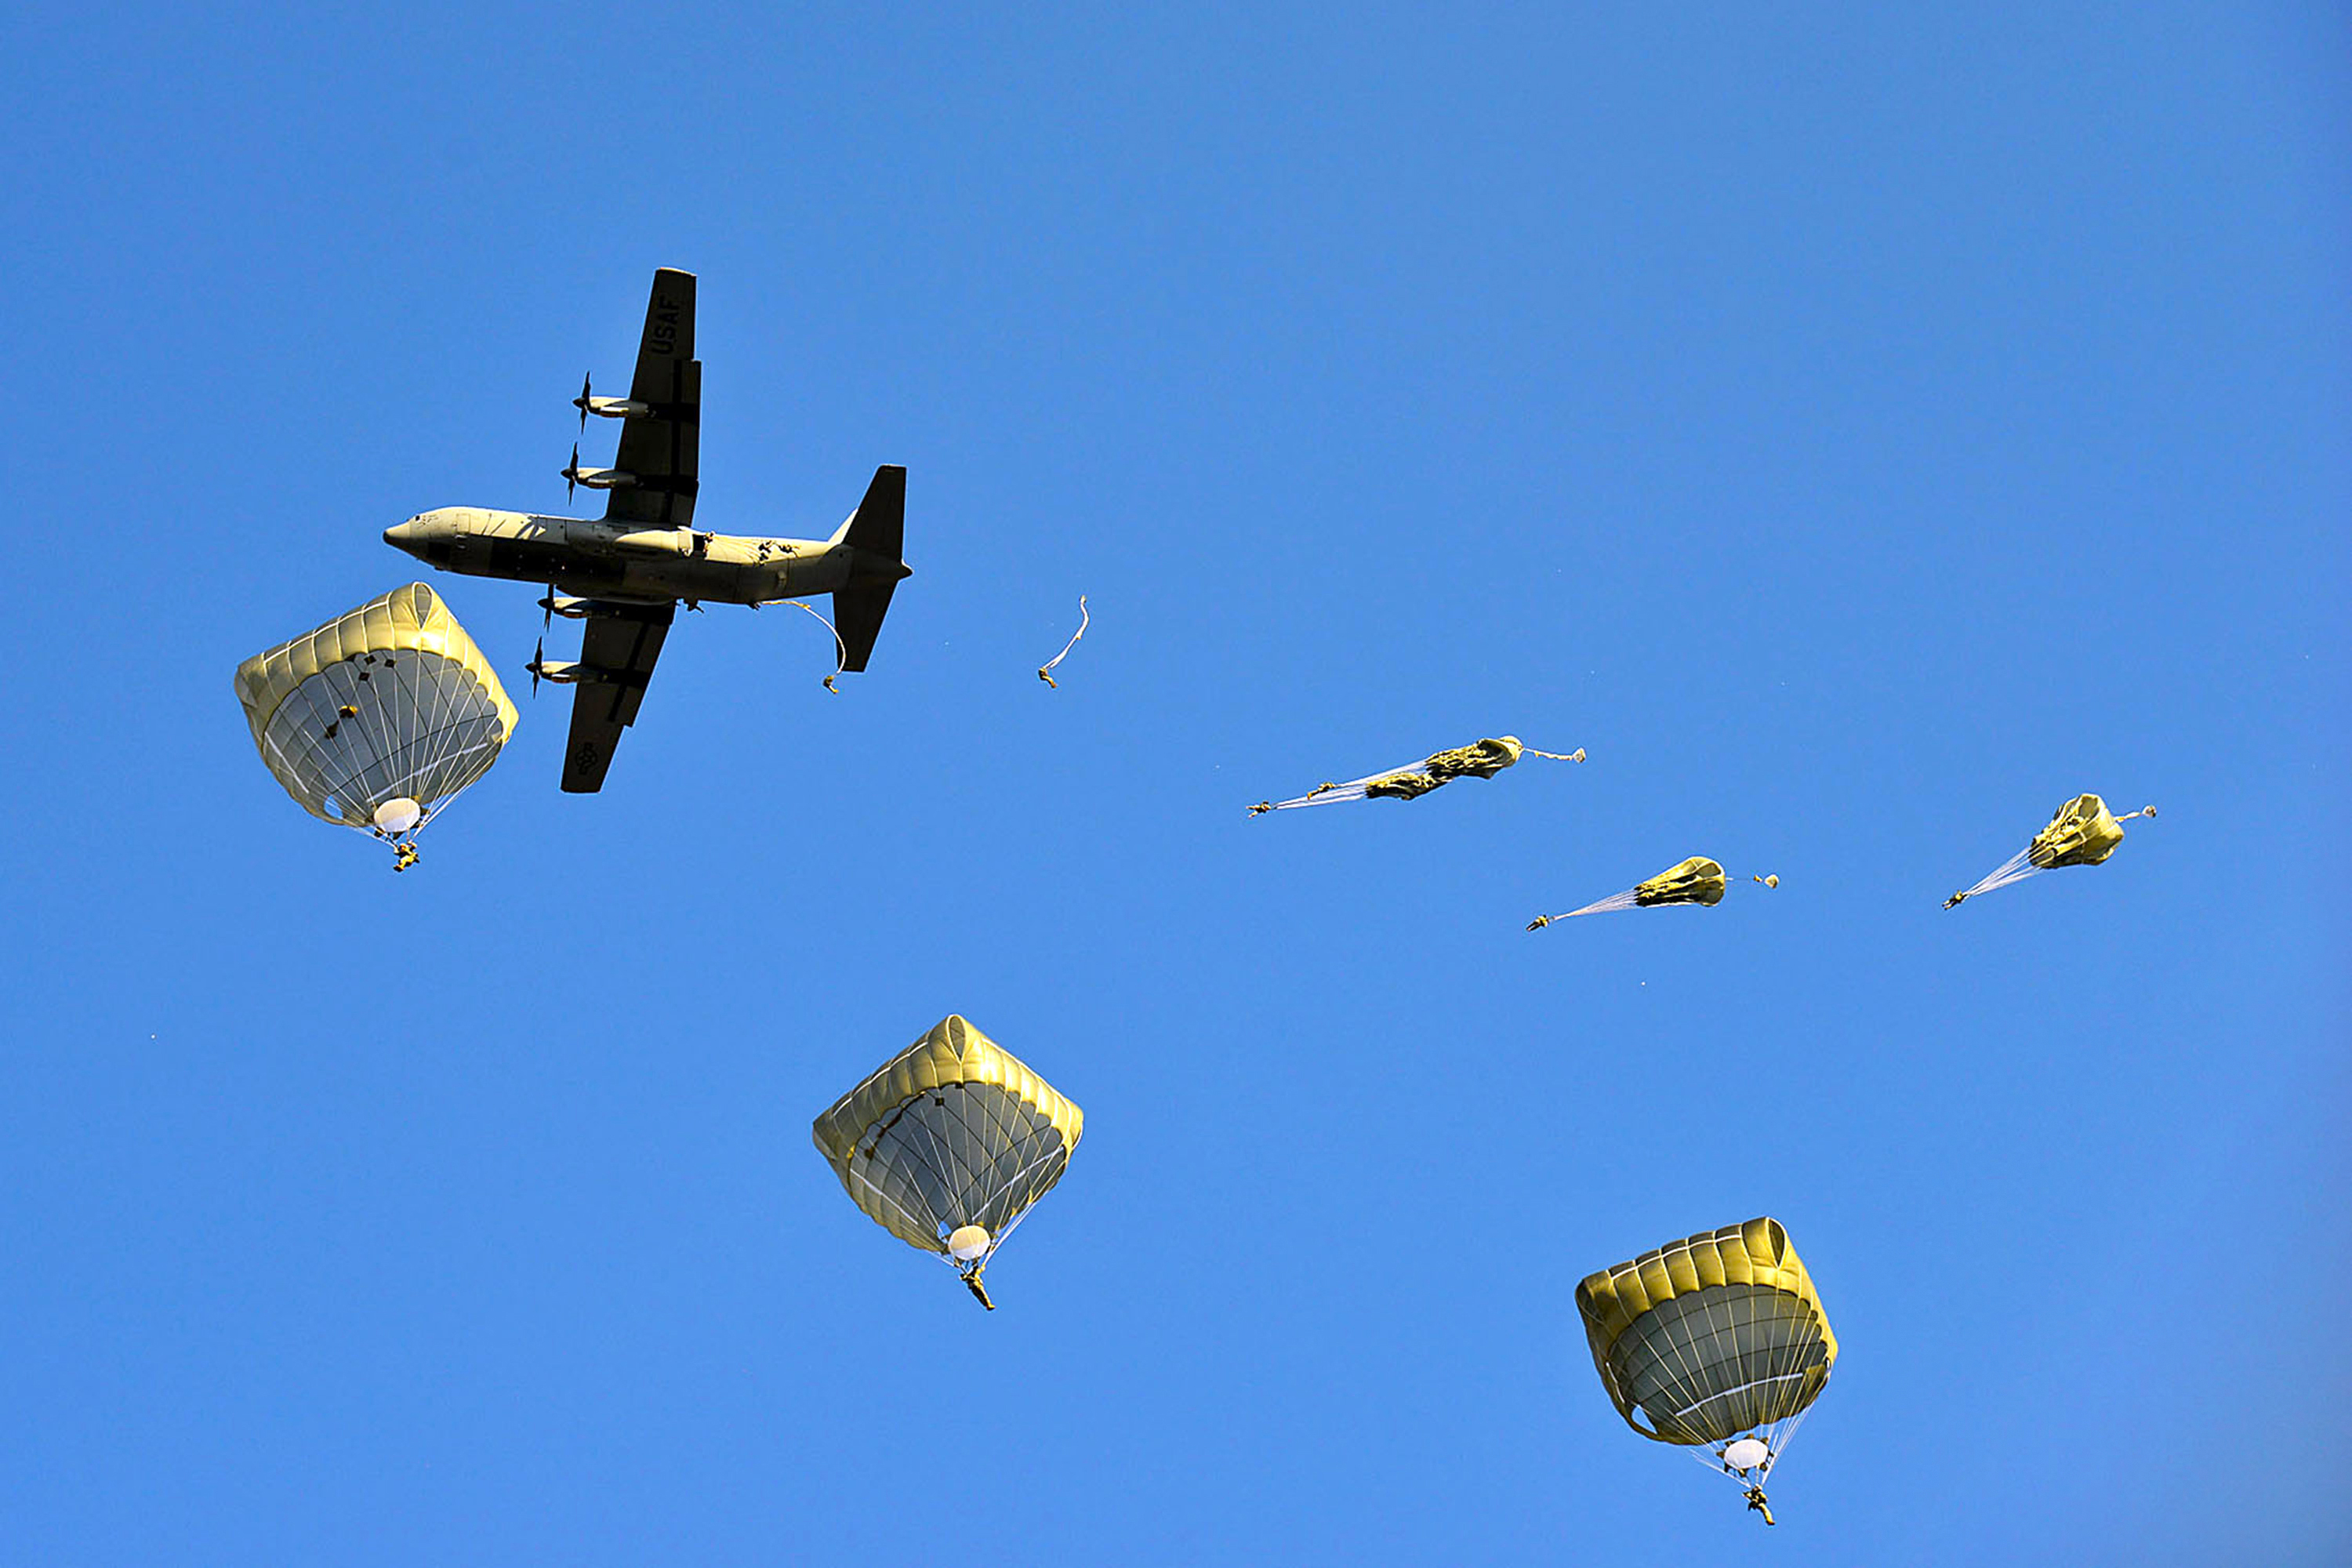 U.S. paratroopers jump out of a C-130 Hercules aircraft over